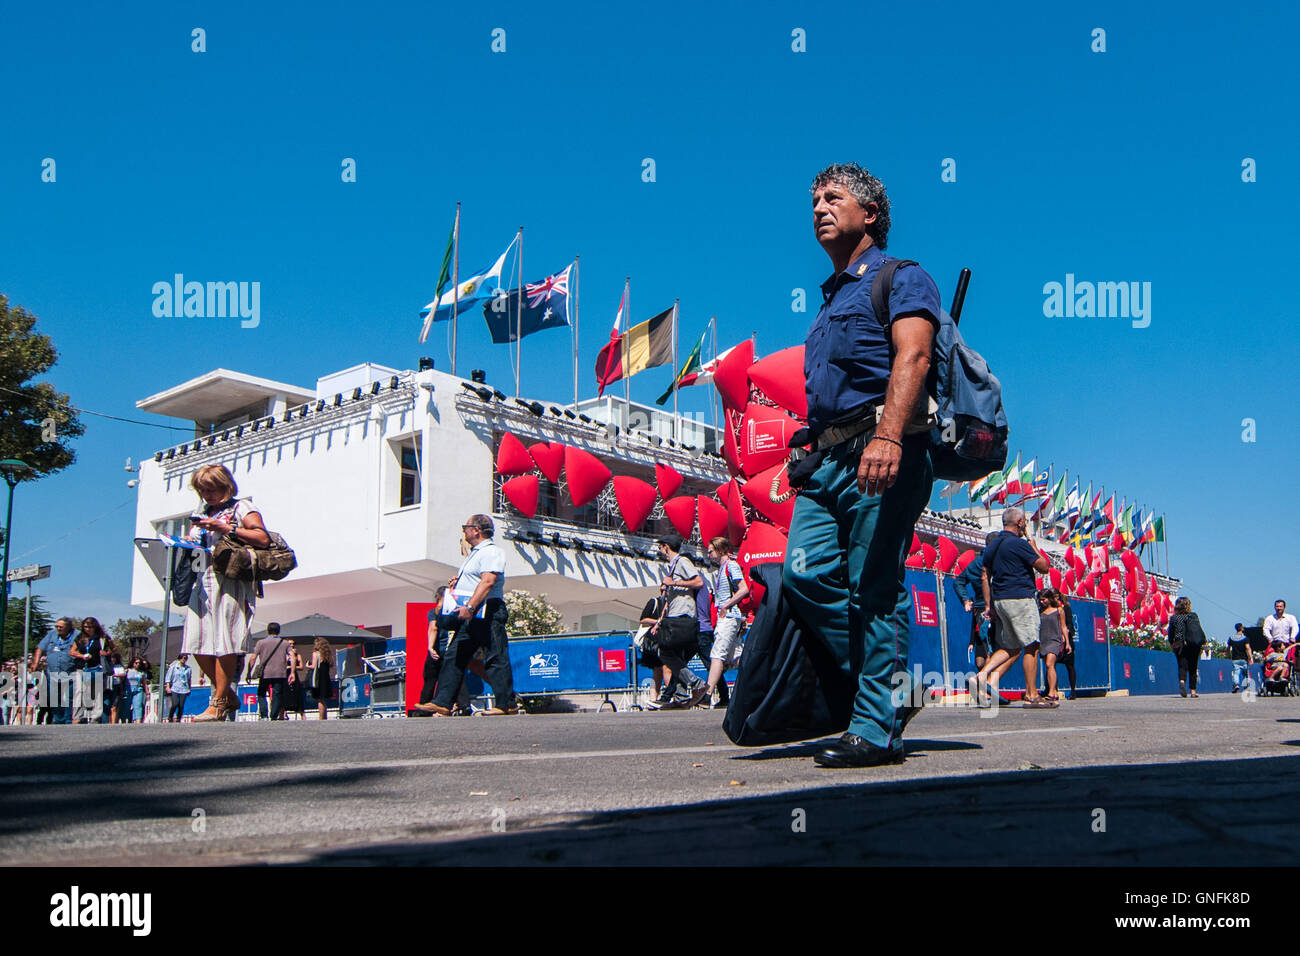 Venice, Italy. 31th August, 2016. A policeman arrives in the area of the red carpet of the 73rd Venice Film Festival. Credit:  Simone Padovani / Awakening / Alamy Live News Stock Photo